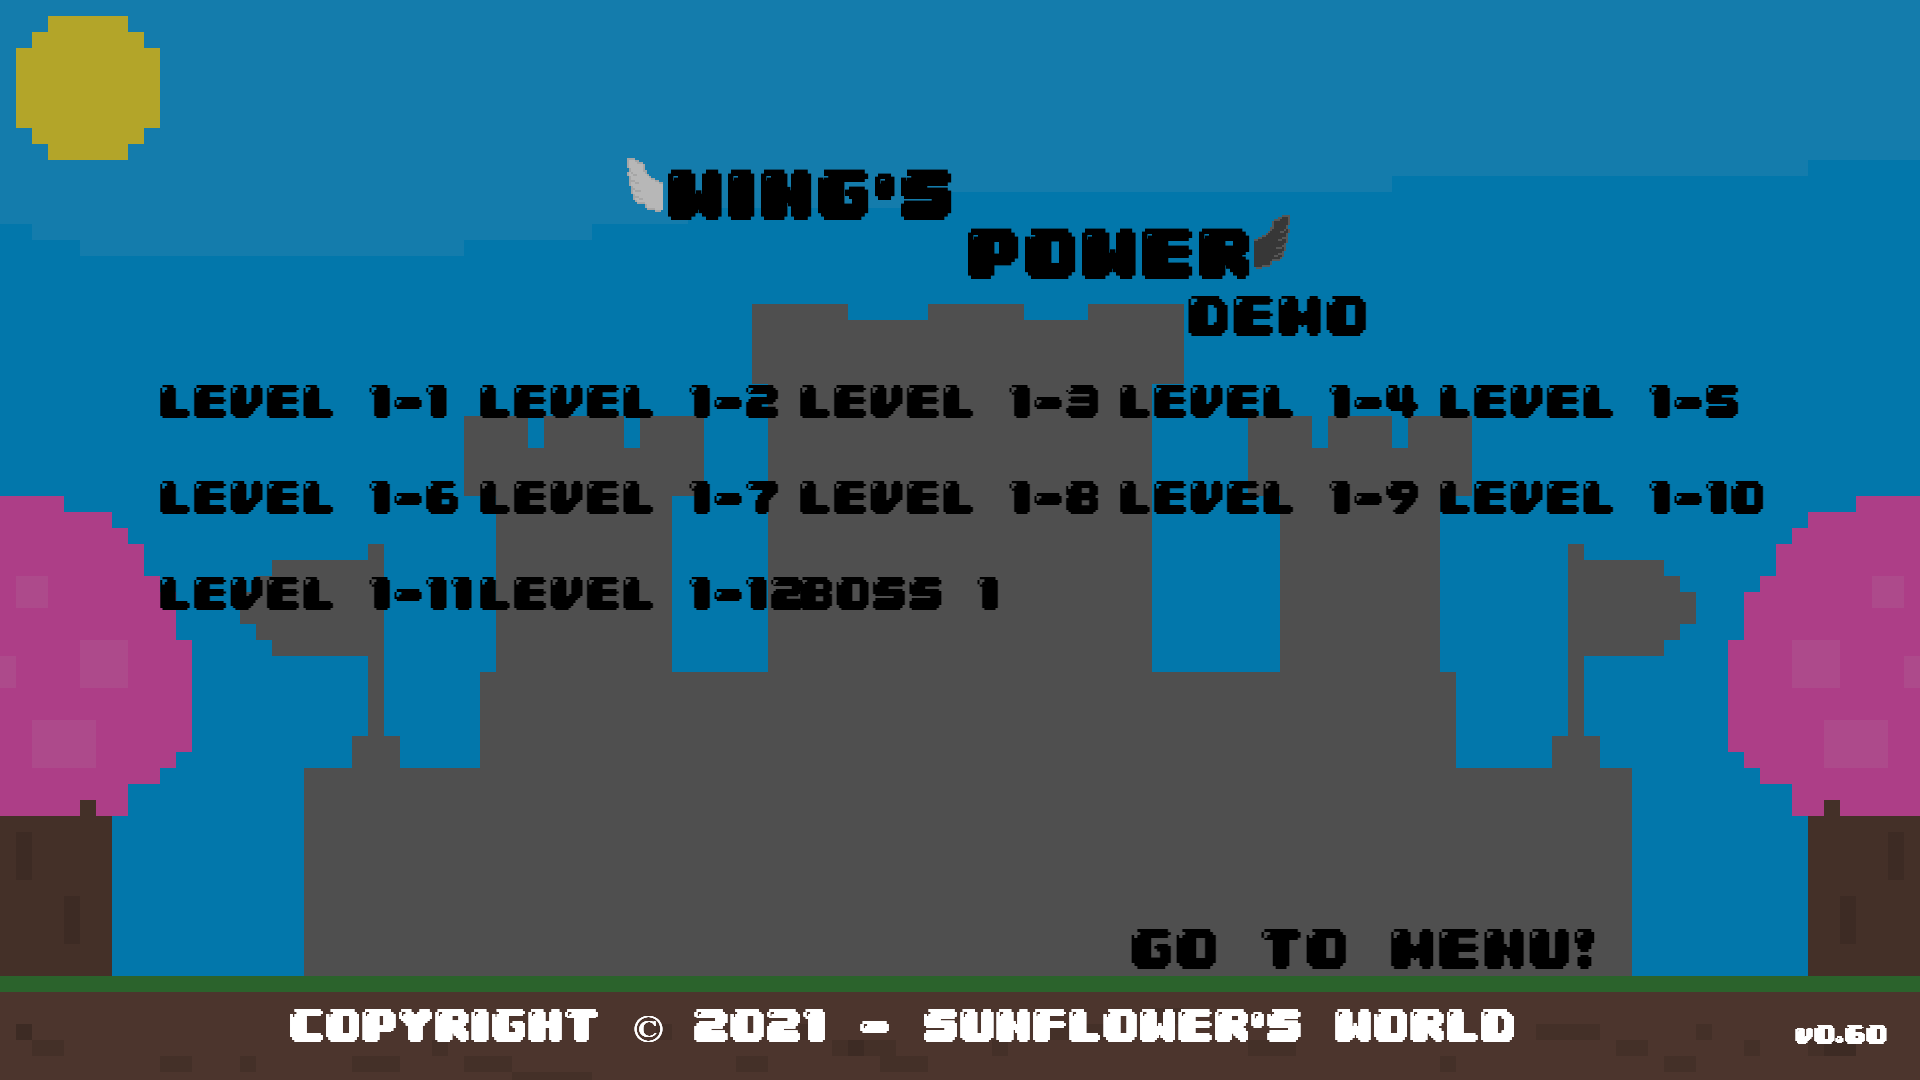 wings-power-level-select-15.02.2021.png